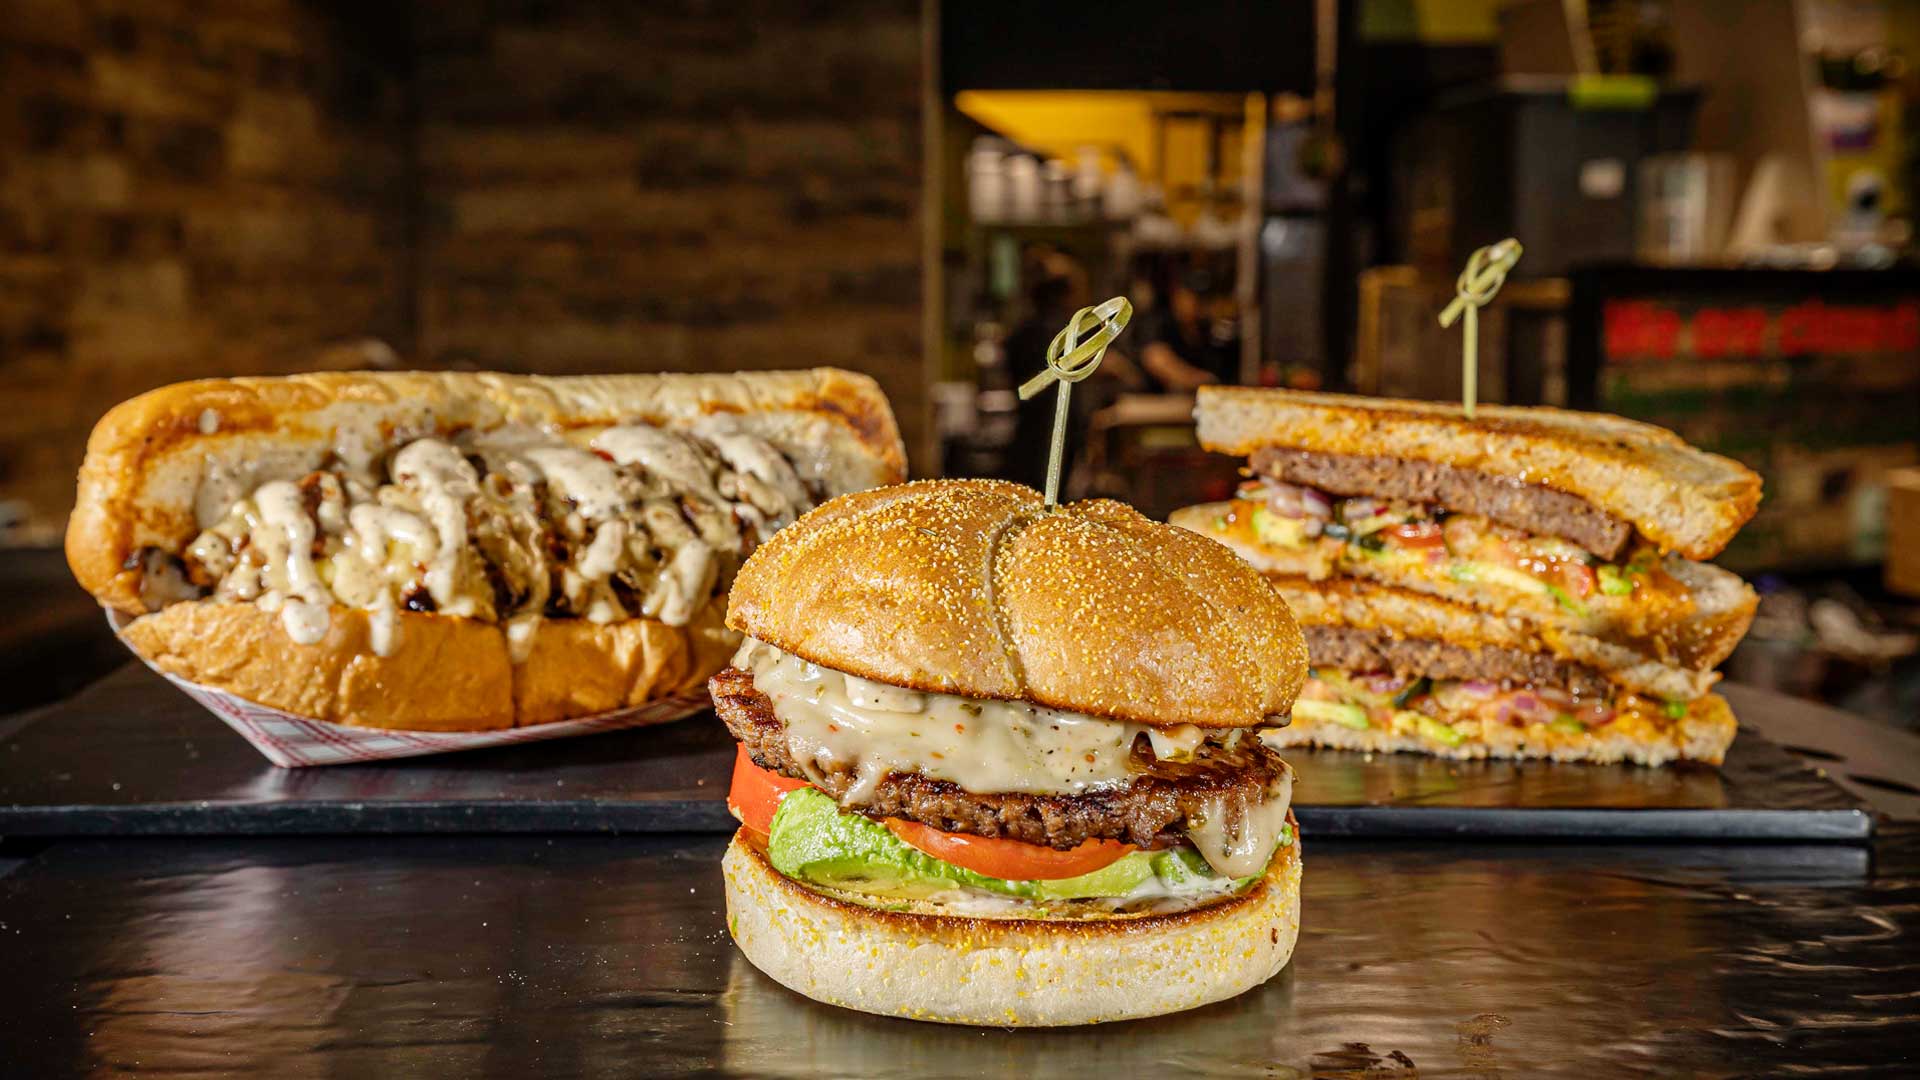 Farmacy is well known for their sandwiches. Pictured here (left to right) is their philly cheese steak, Farmacy burger, and frisco melt. (Photography by Gabriel Burgos)